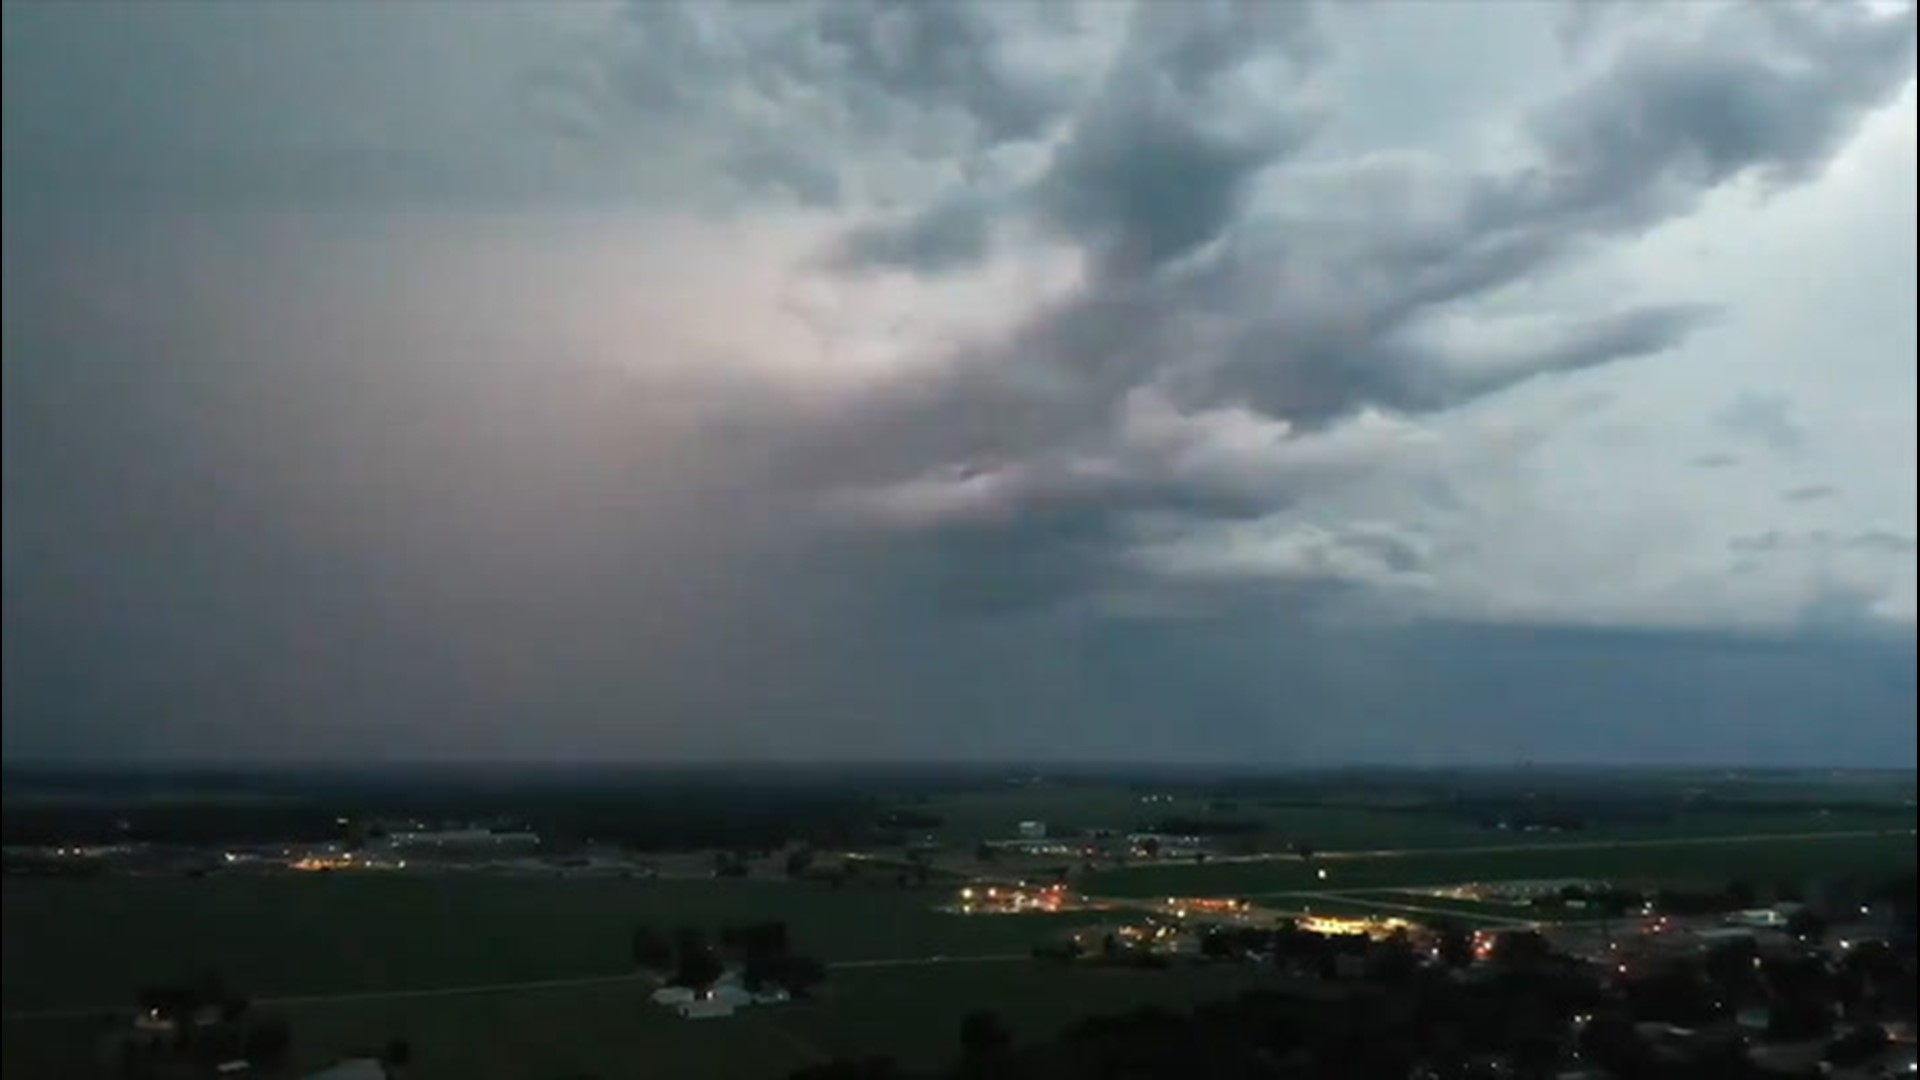 On July 11, residents of Goodfield, Illinois, were able to look up at the sky and be treated to a show, as lightning danced within the clouds.